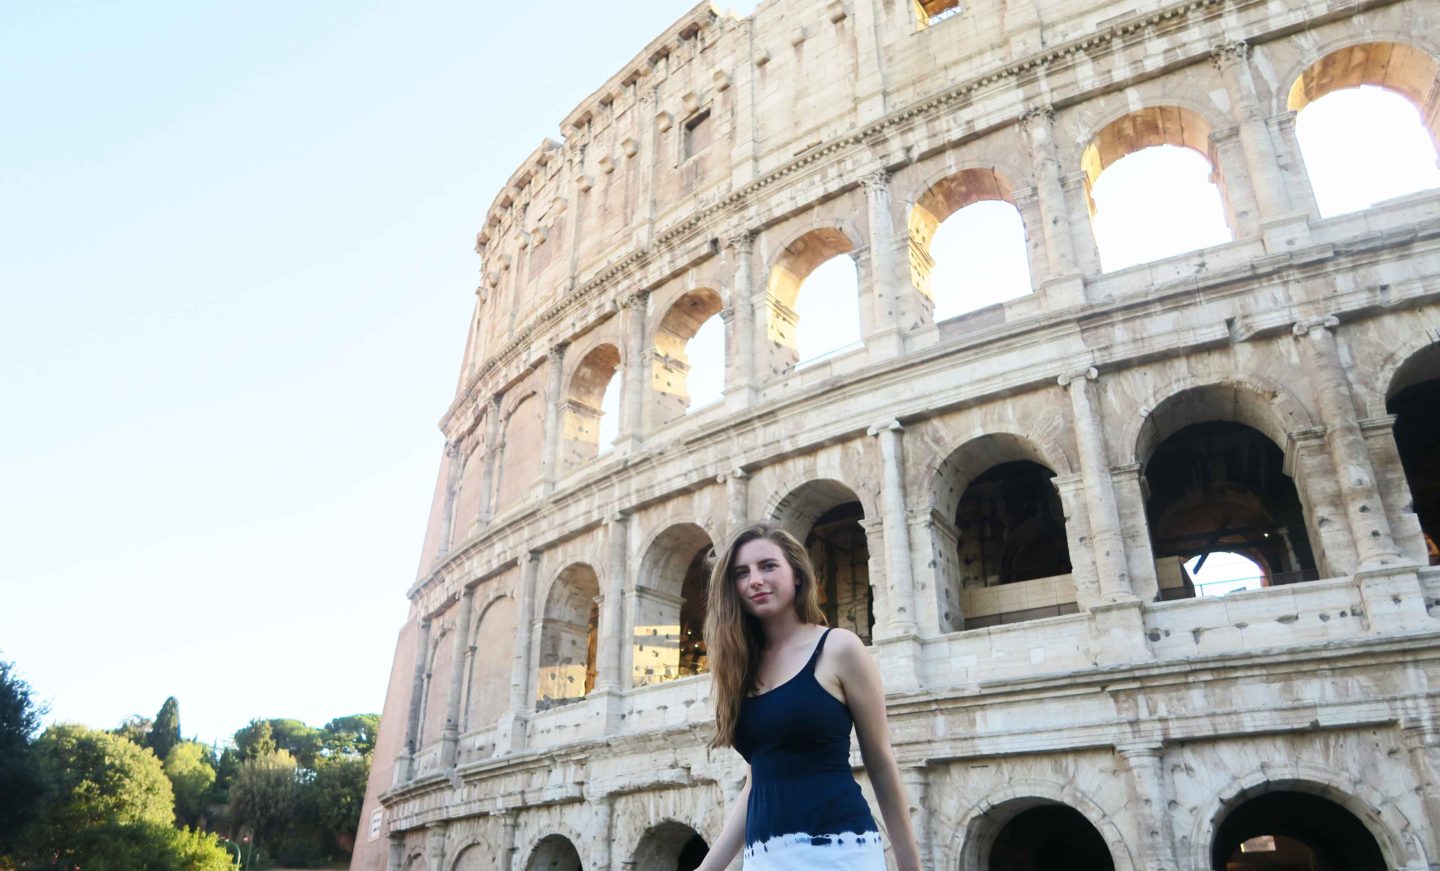 melissa carne standing in front of the colosseum in rome in italy